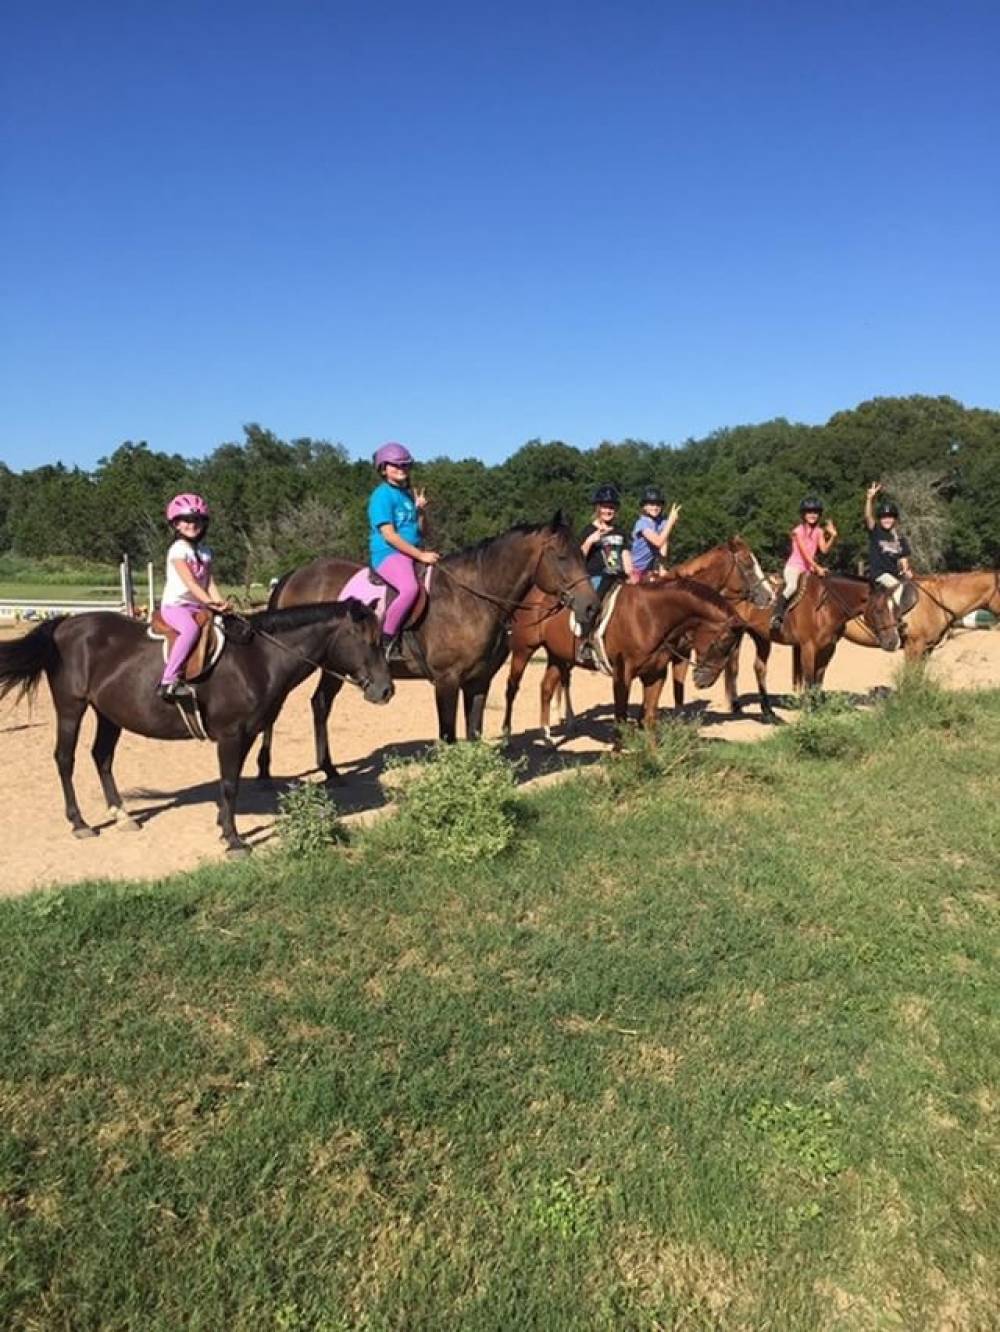 TOP TEXAS OVERNIGHT CAMP: Hunters Chase Farms Inc. is a Top Overnight Summer Camp located in Wimberley Texas offering many fun and enriching Overnight and other camp programs. Hunters Chase Farms Inc. also offers CIT/LIT and/or Teen Leadership Opportunities, too.